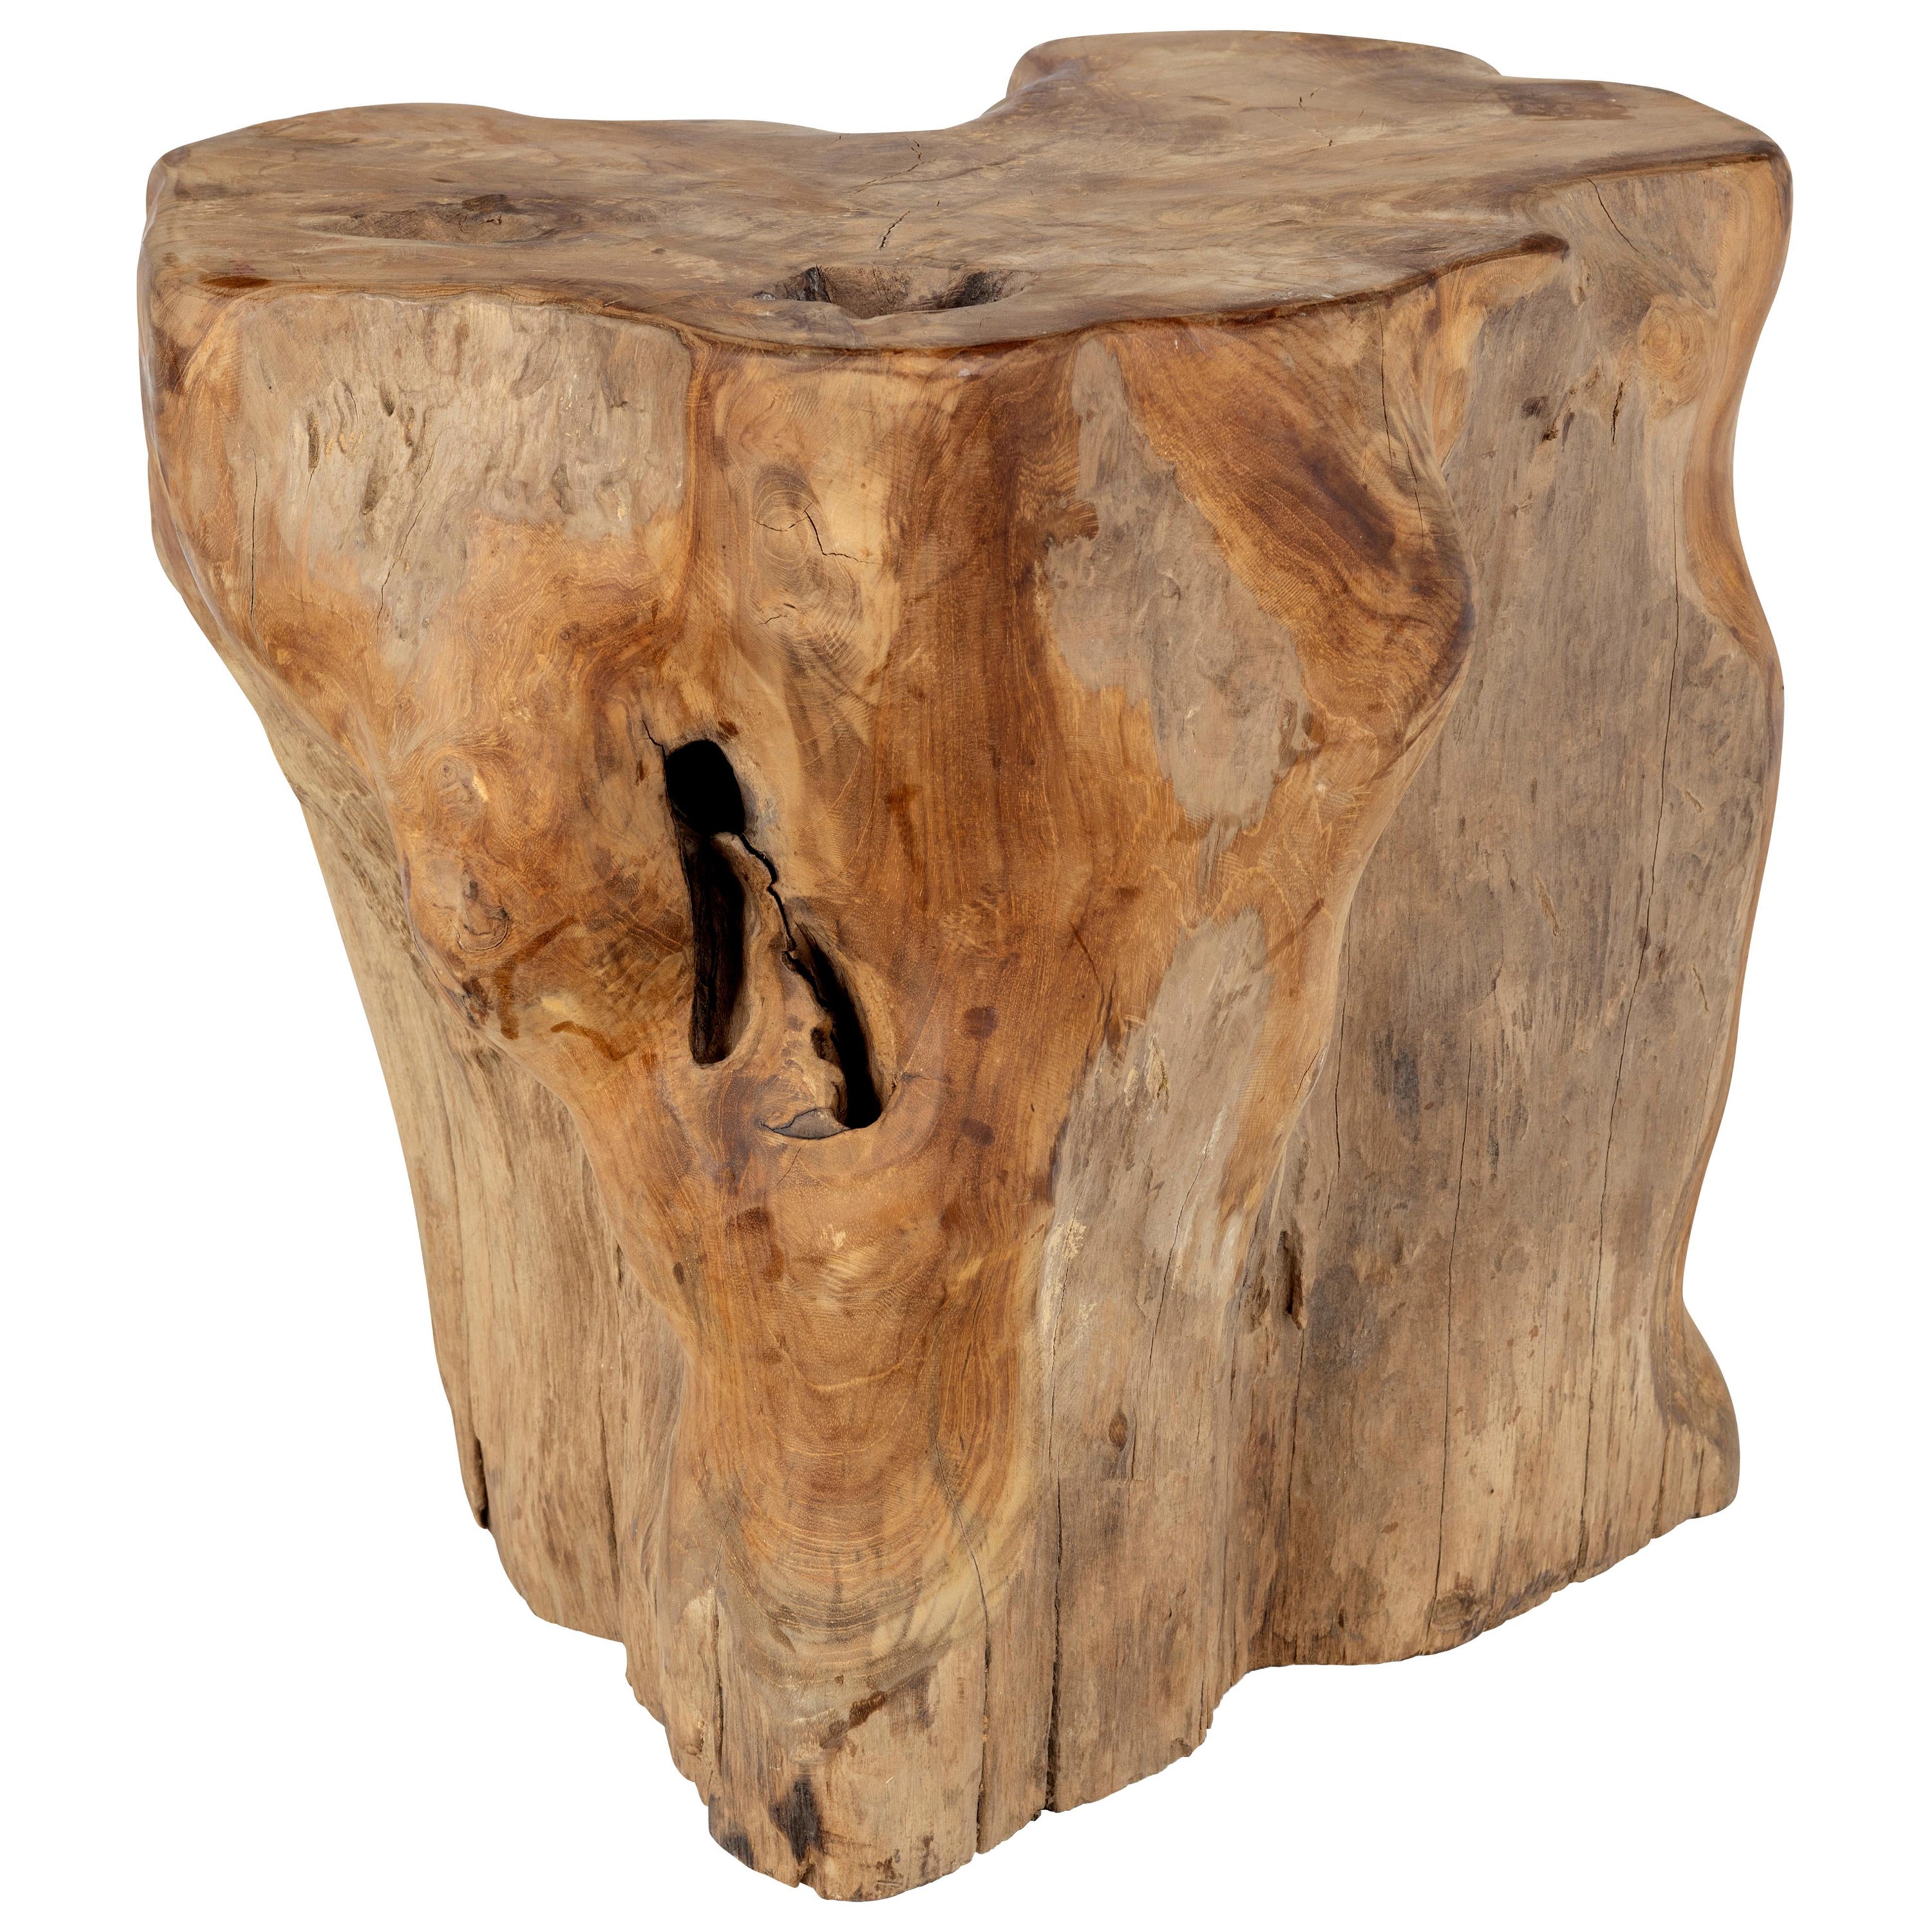 Organic Form Side Table 